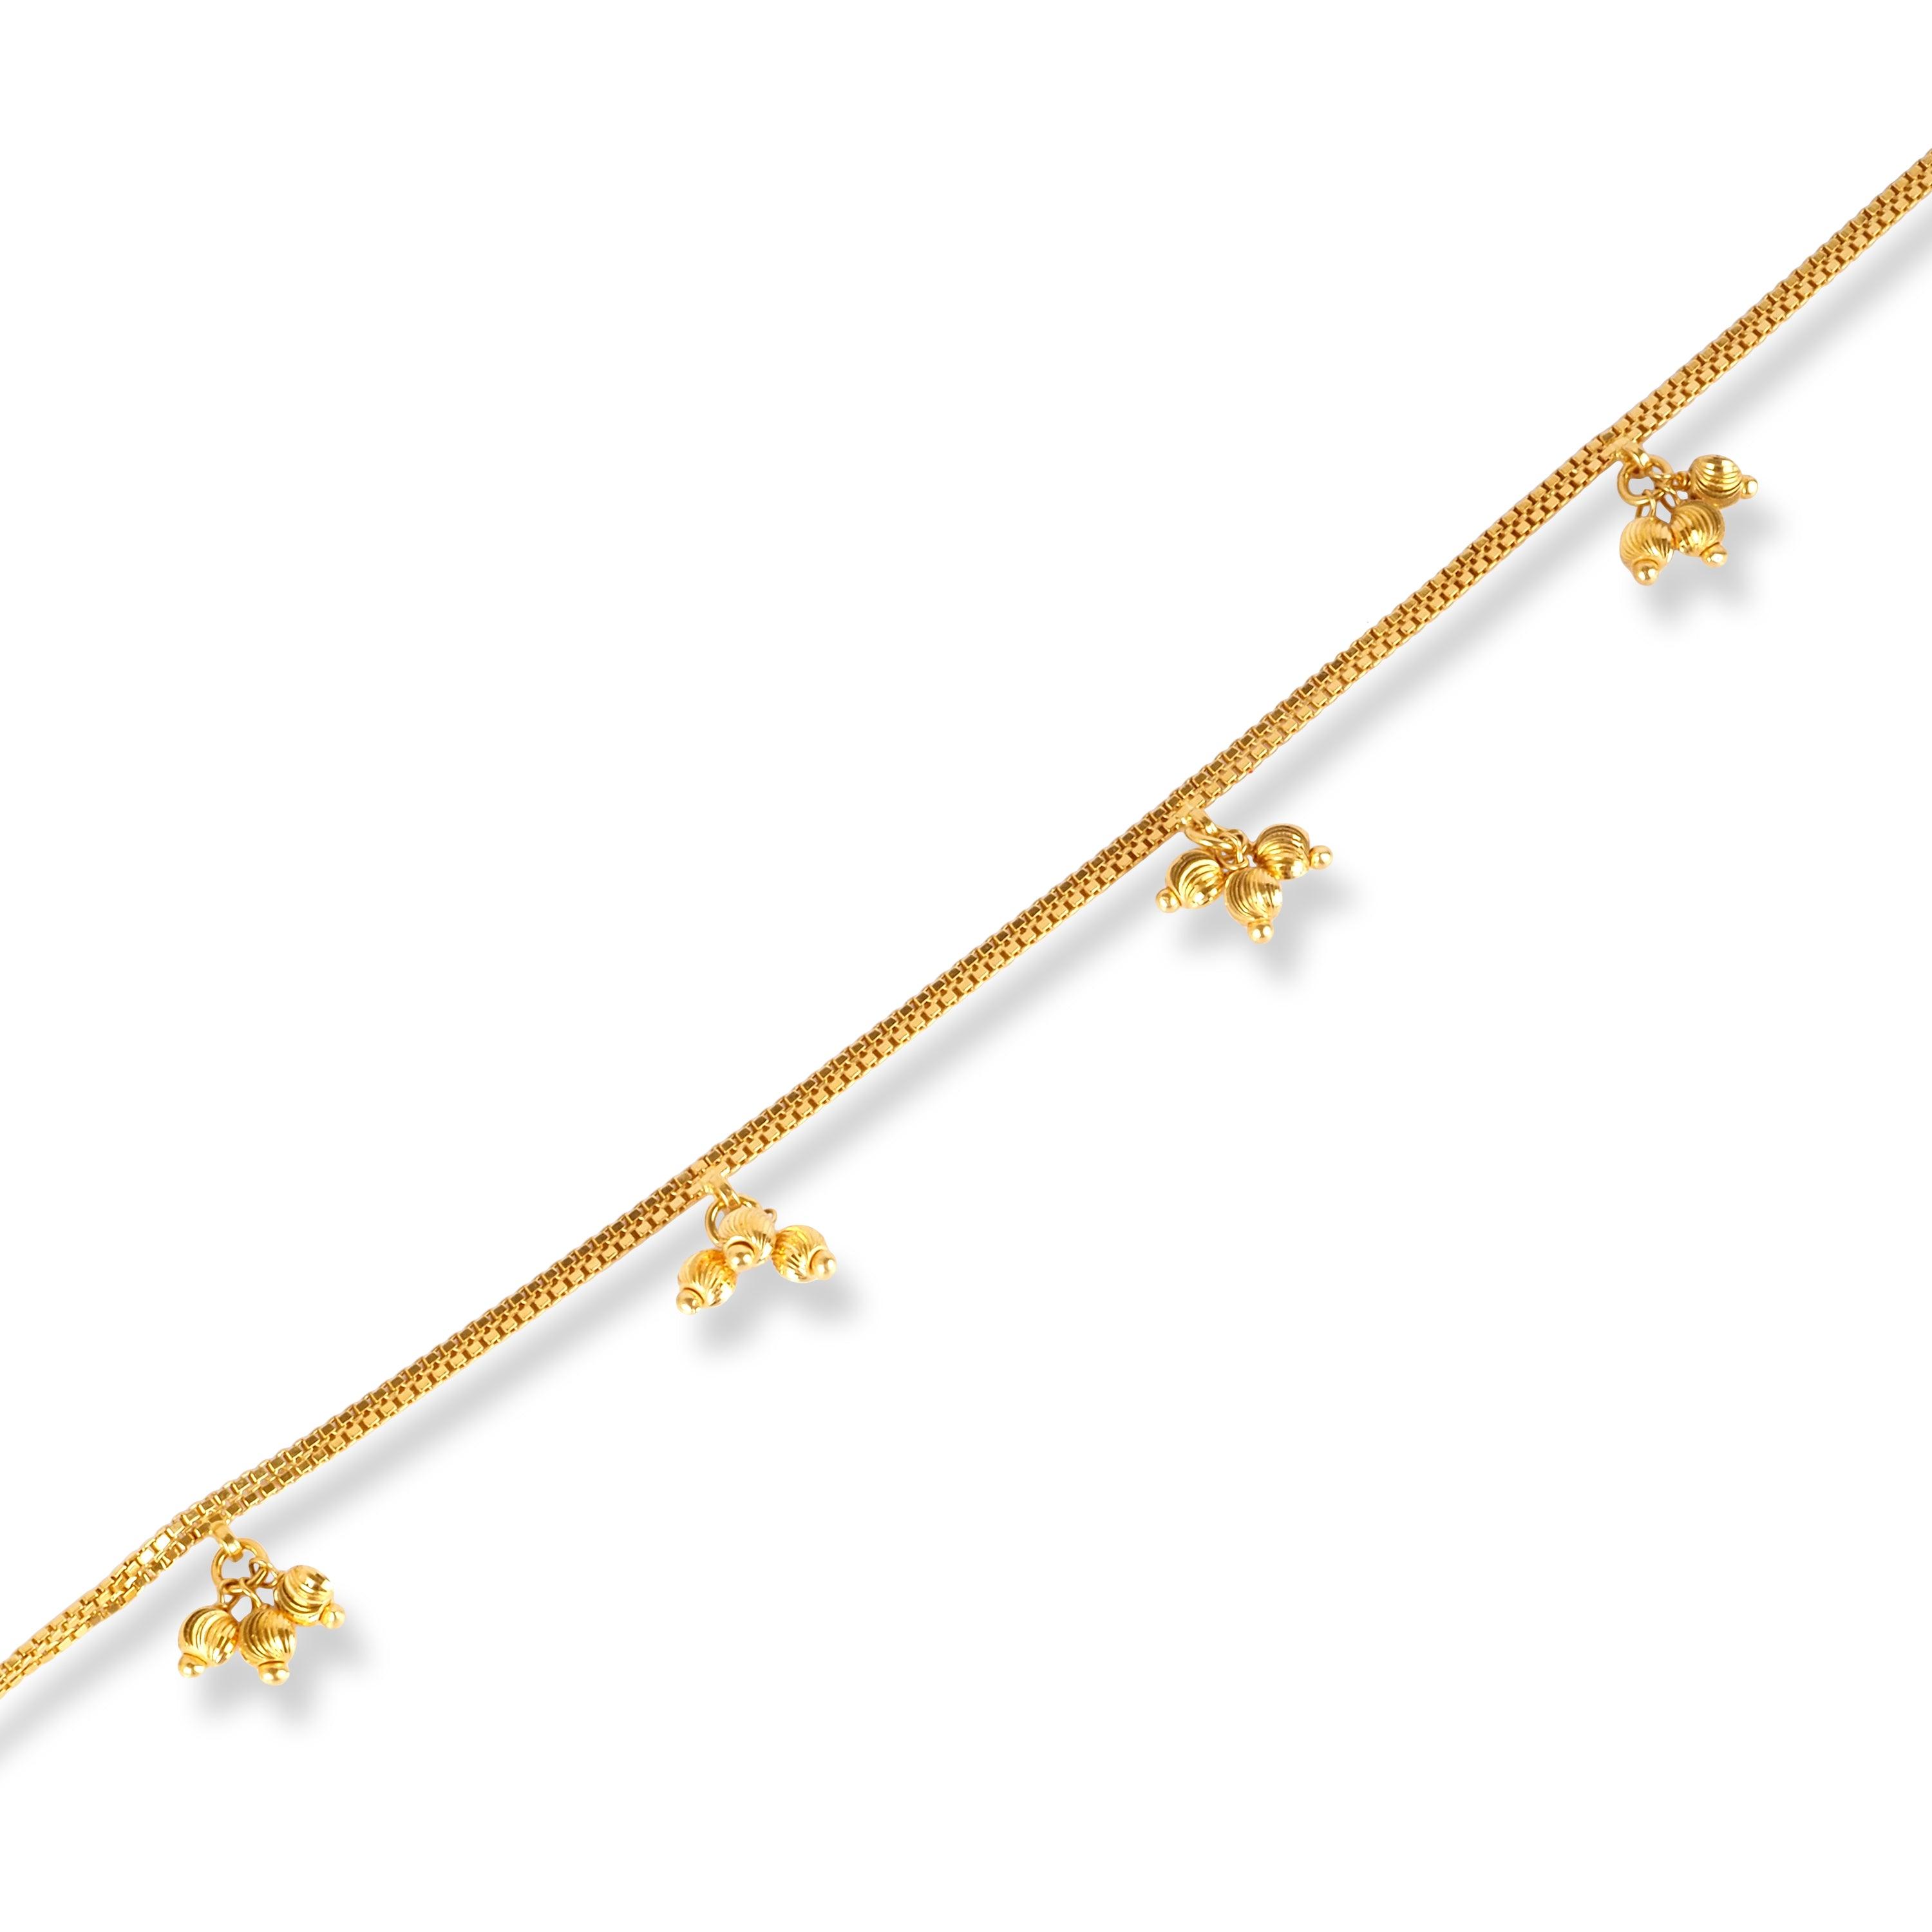 22ct Gold Anklet in Box Chain Design with Ghughri Charm with '' S '' Clasp A-8267 - Minar Jewellers